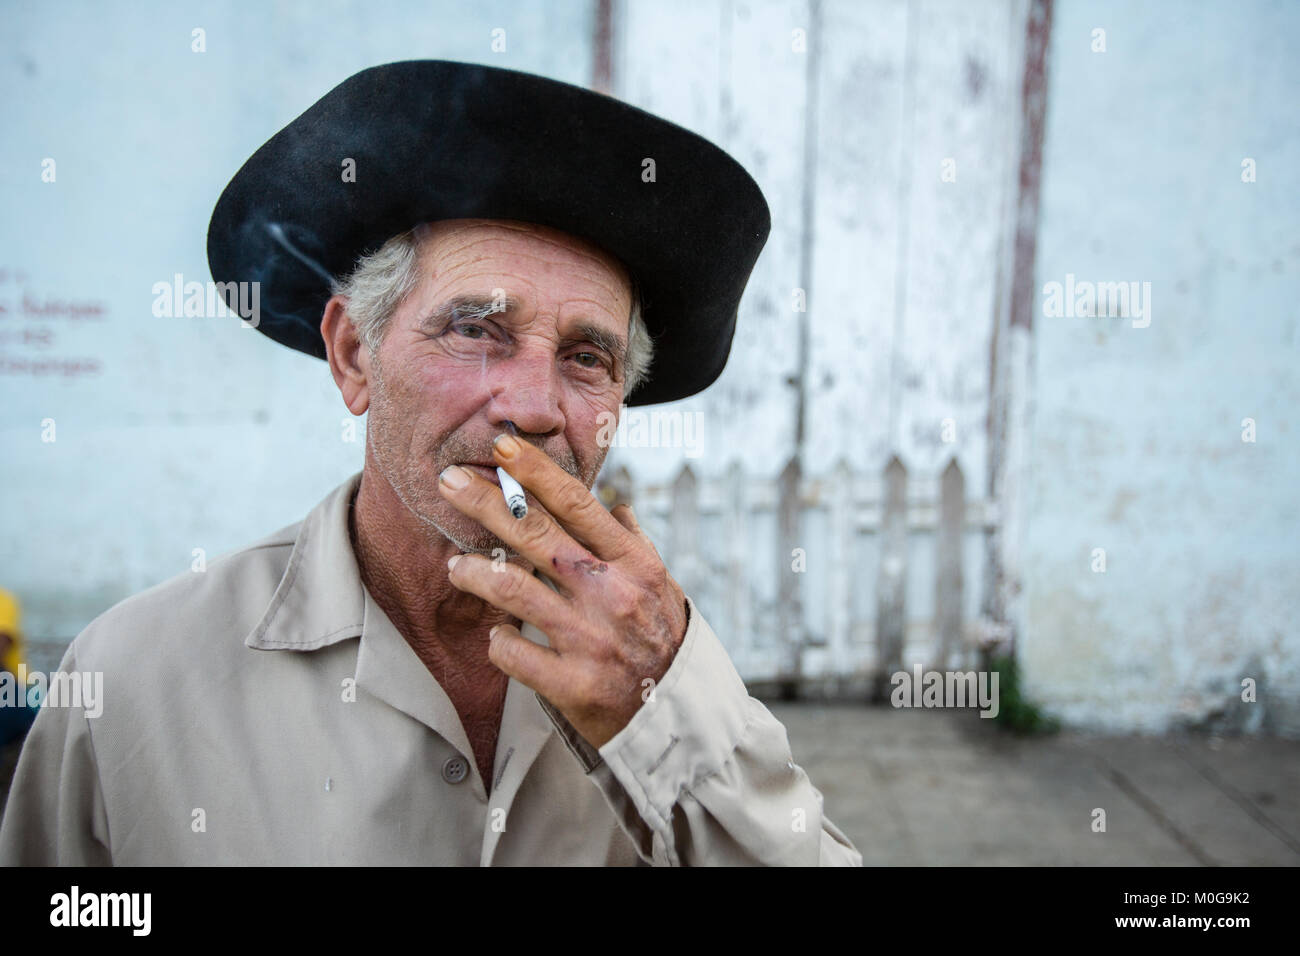 Man passing time smoking in Vinales Valley, Cuba Stock Photo